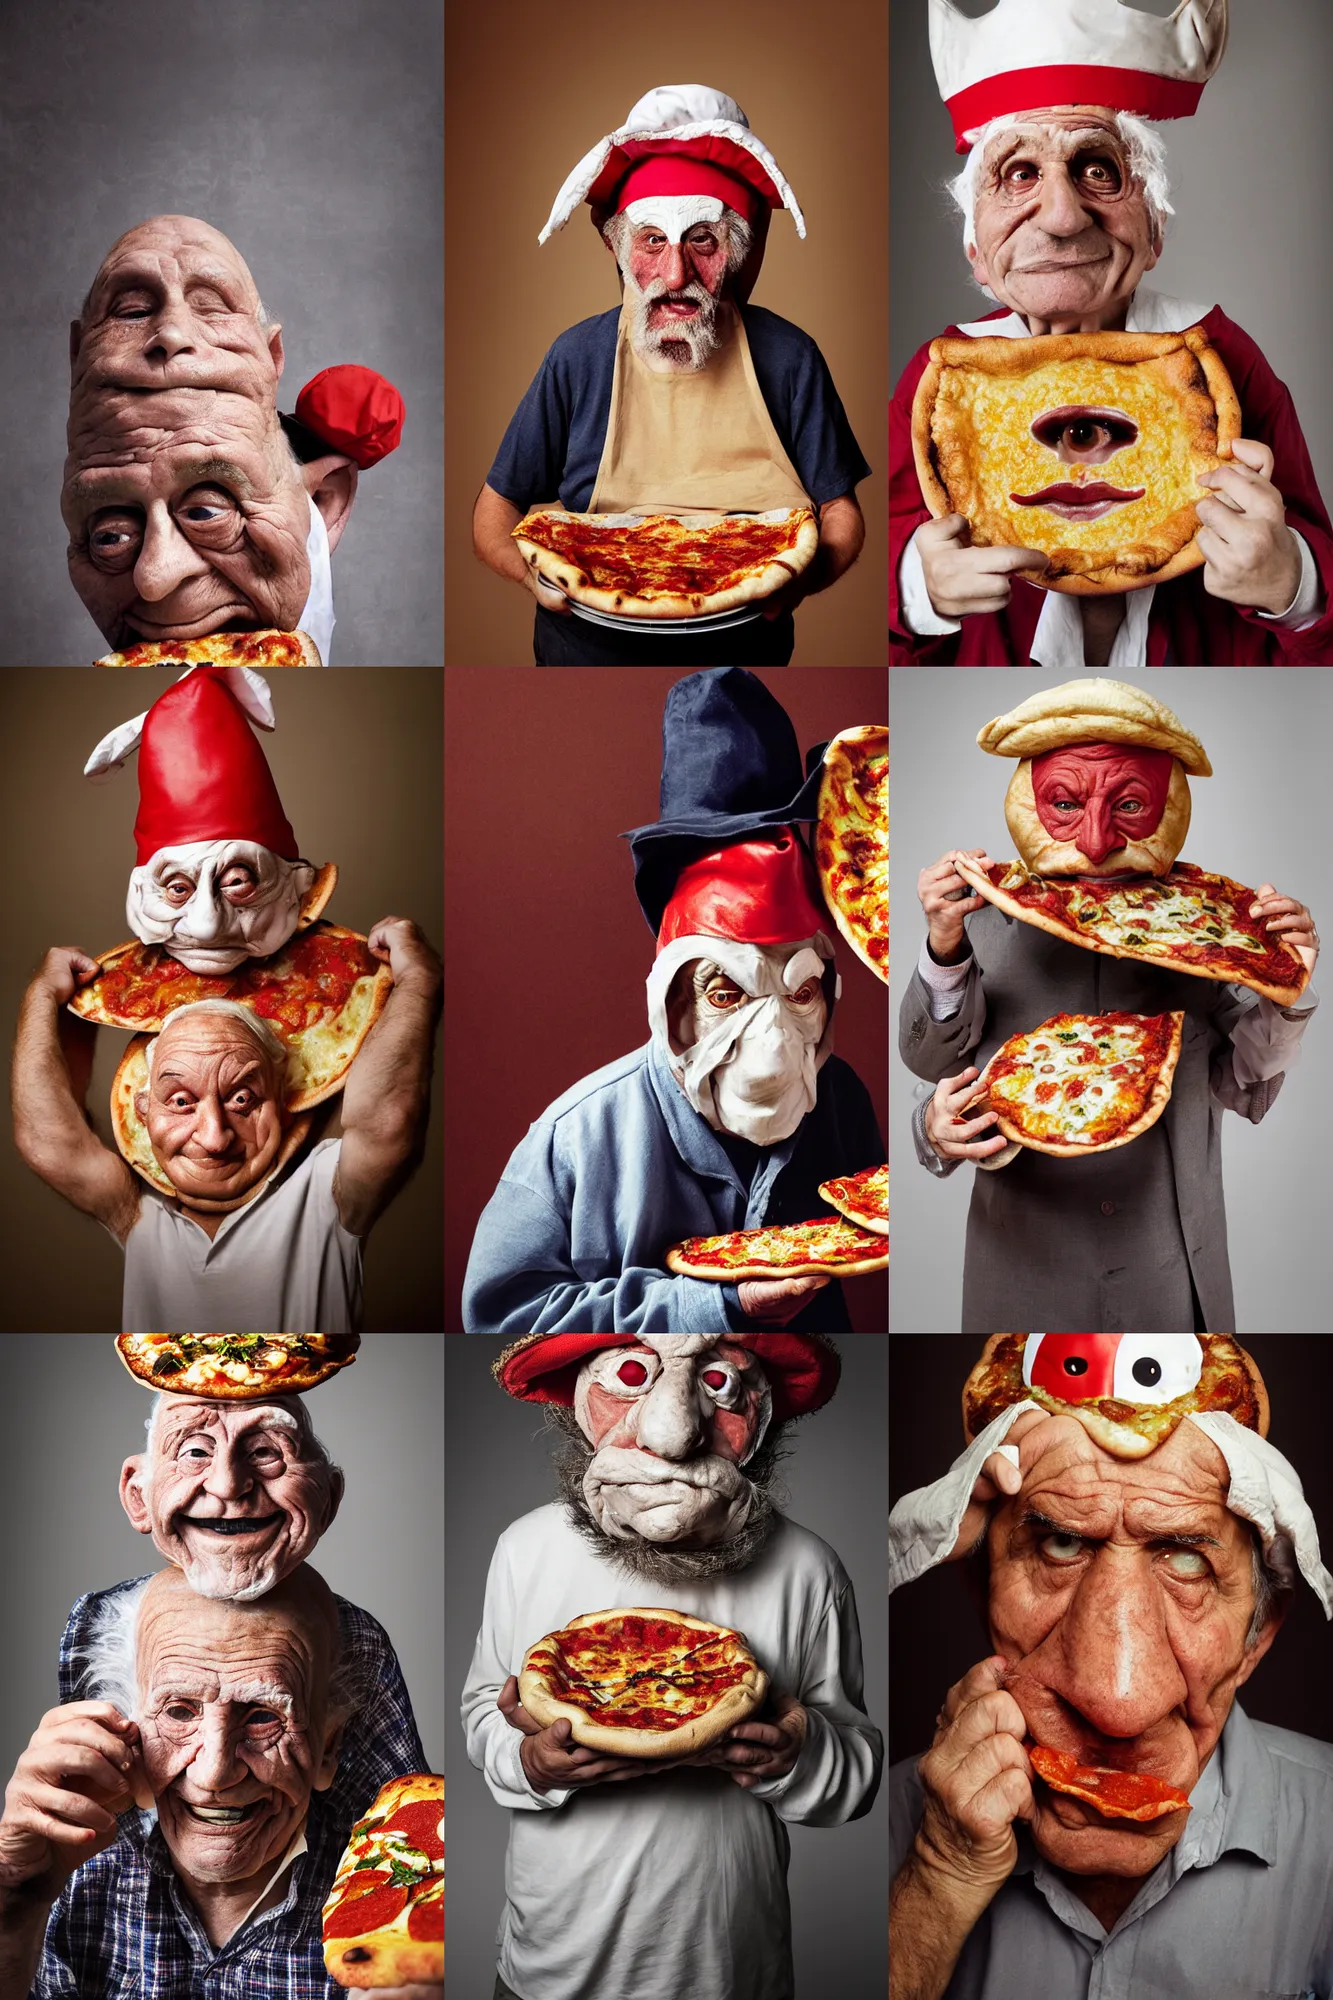 Prompt: close - up portrait of a wrinkled old man wearing a pulcinella mask holding up a pizza!! to behold, clear eyes looking into camera, baggy clothing and hat, masterpiece photo by martin schoeller